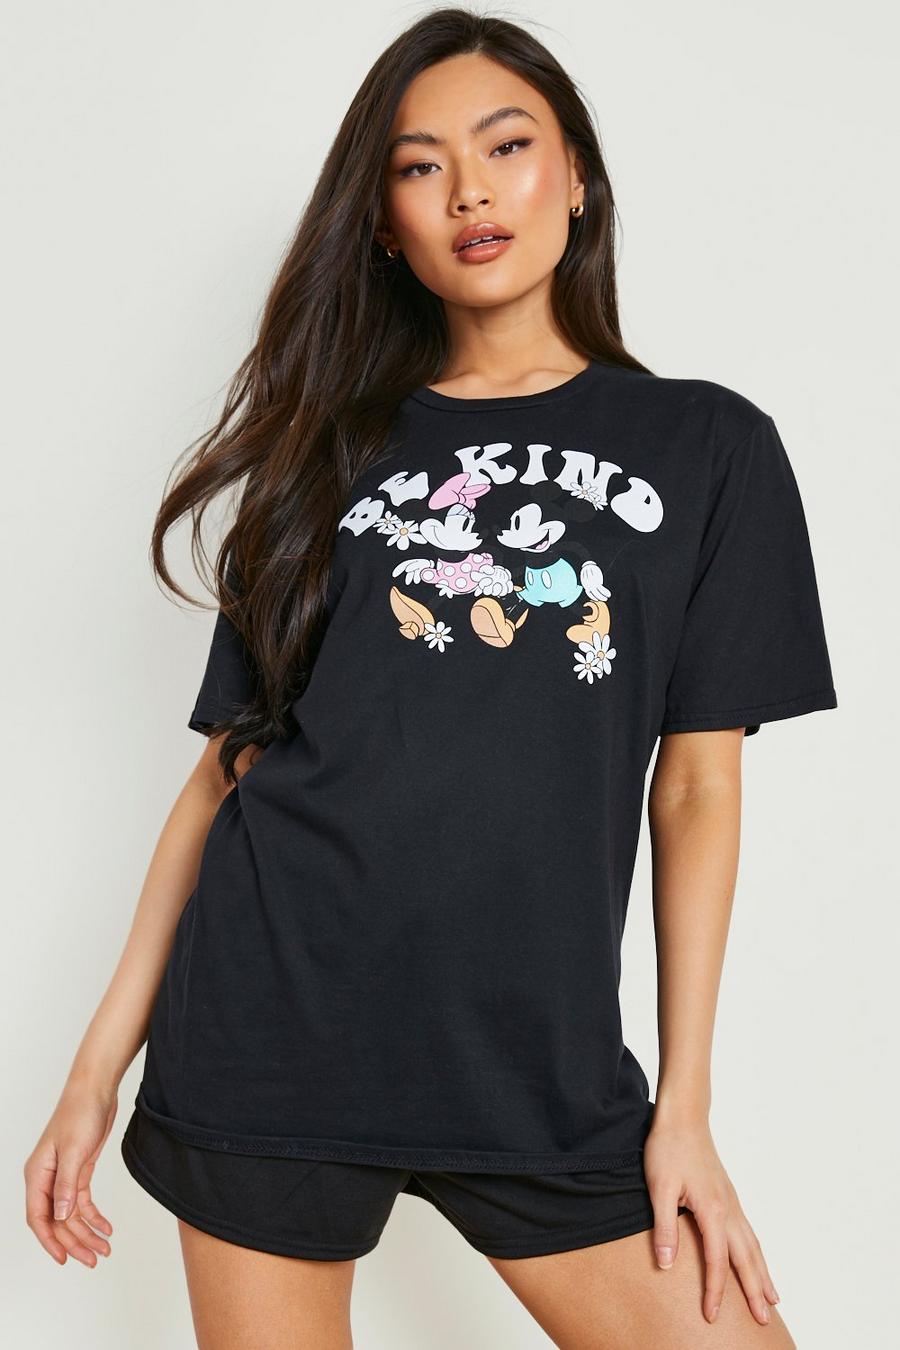 T-shirt Disney con Minnie & Mickey Mouse con scritta Be Kind & pantaloncini, Black image number 1